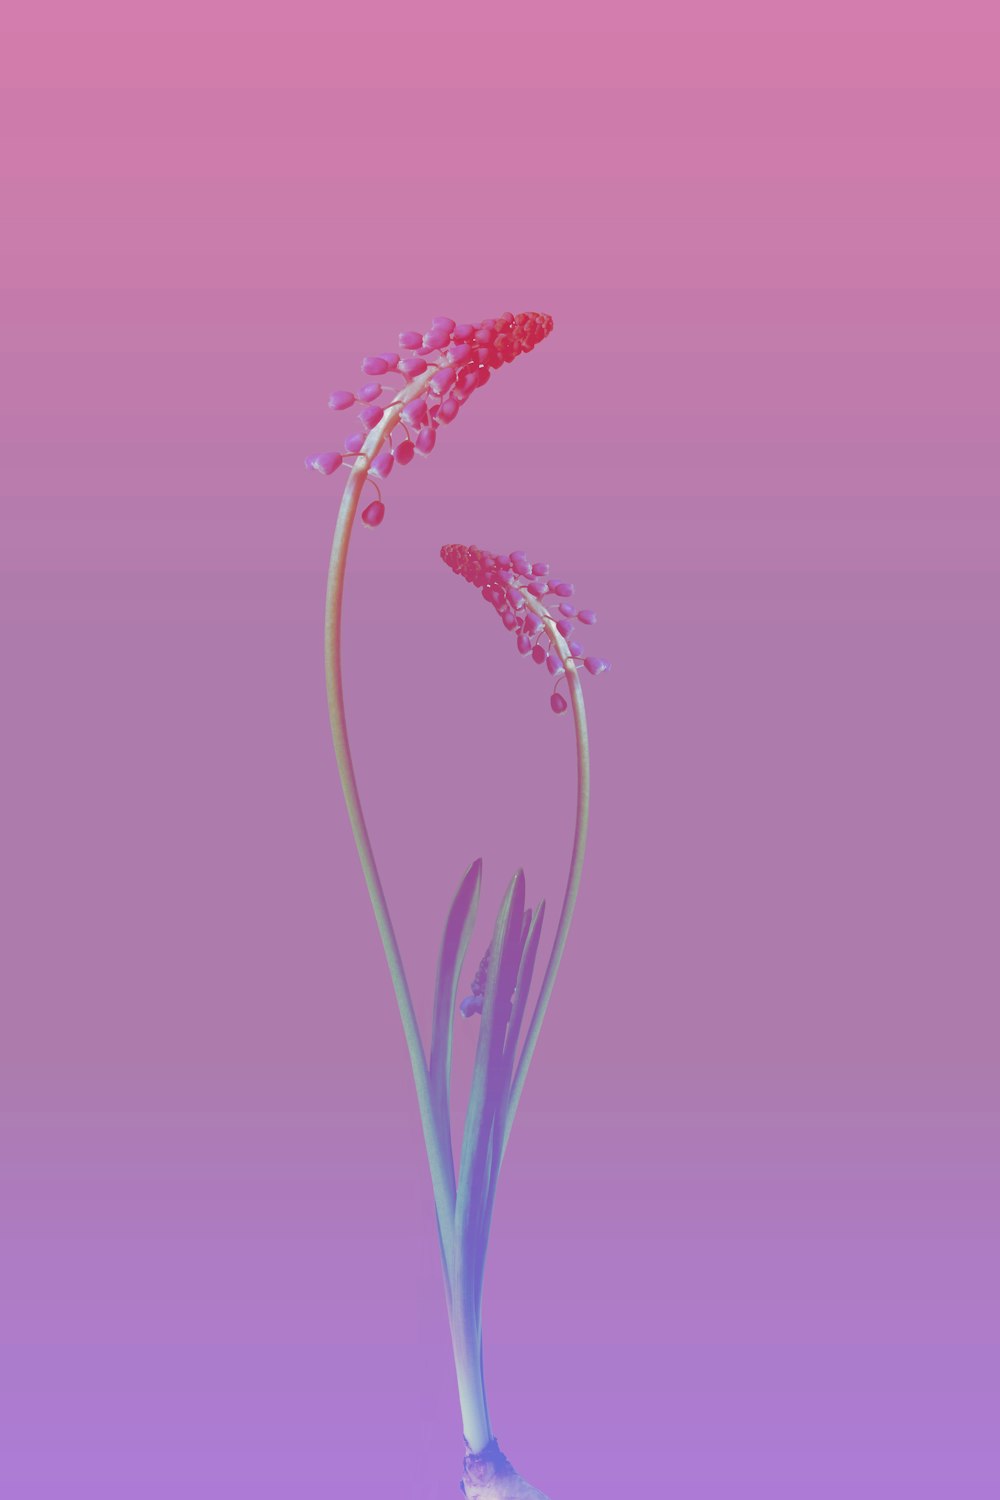 a pink and blue flower on a purple and pink background